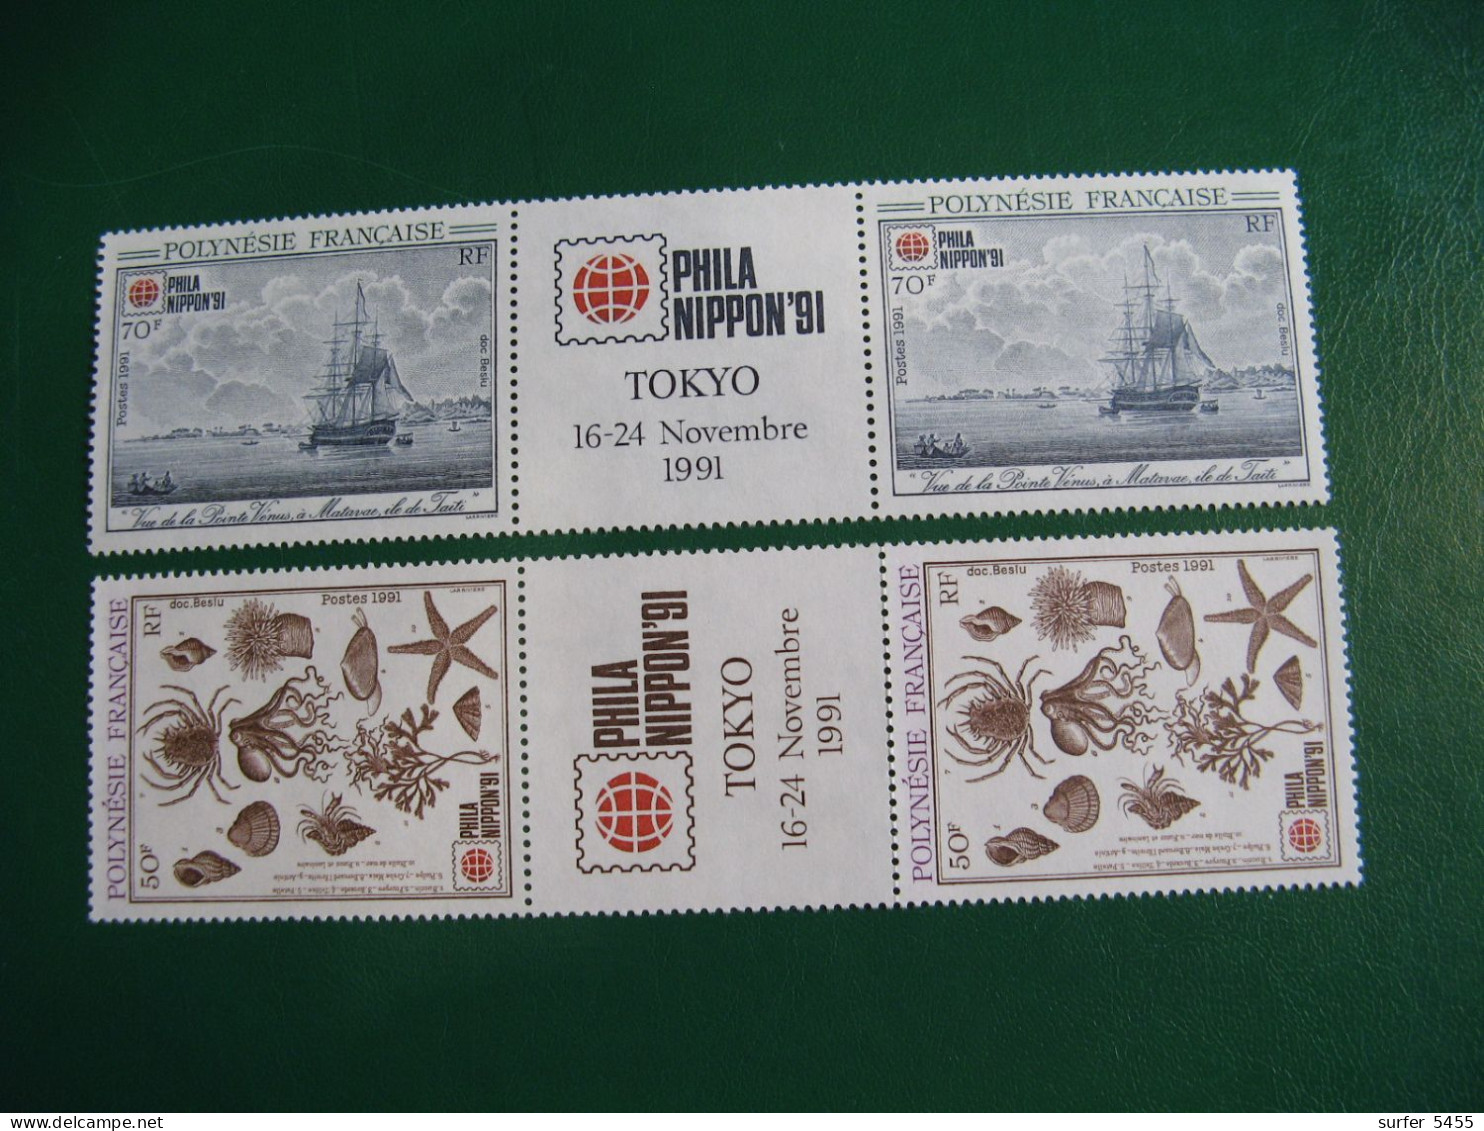 P0LYNESIE YVERT PO ORDINAIRE N° 393A/394A TIMBRES NEUFS ** LUXE - MNH - SERIES COMPLETES- COTE 8,40 EUROS - Nuovi